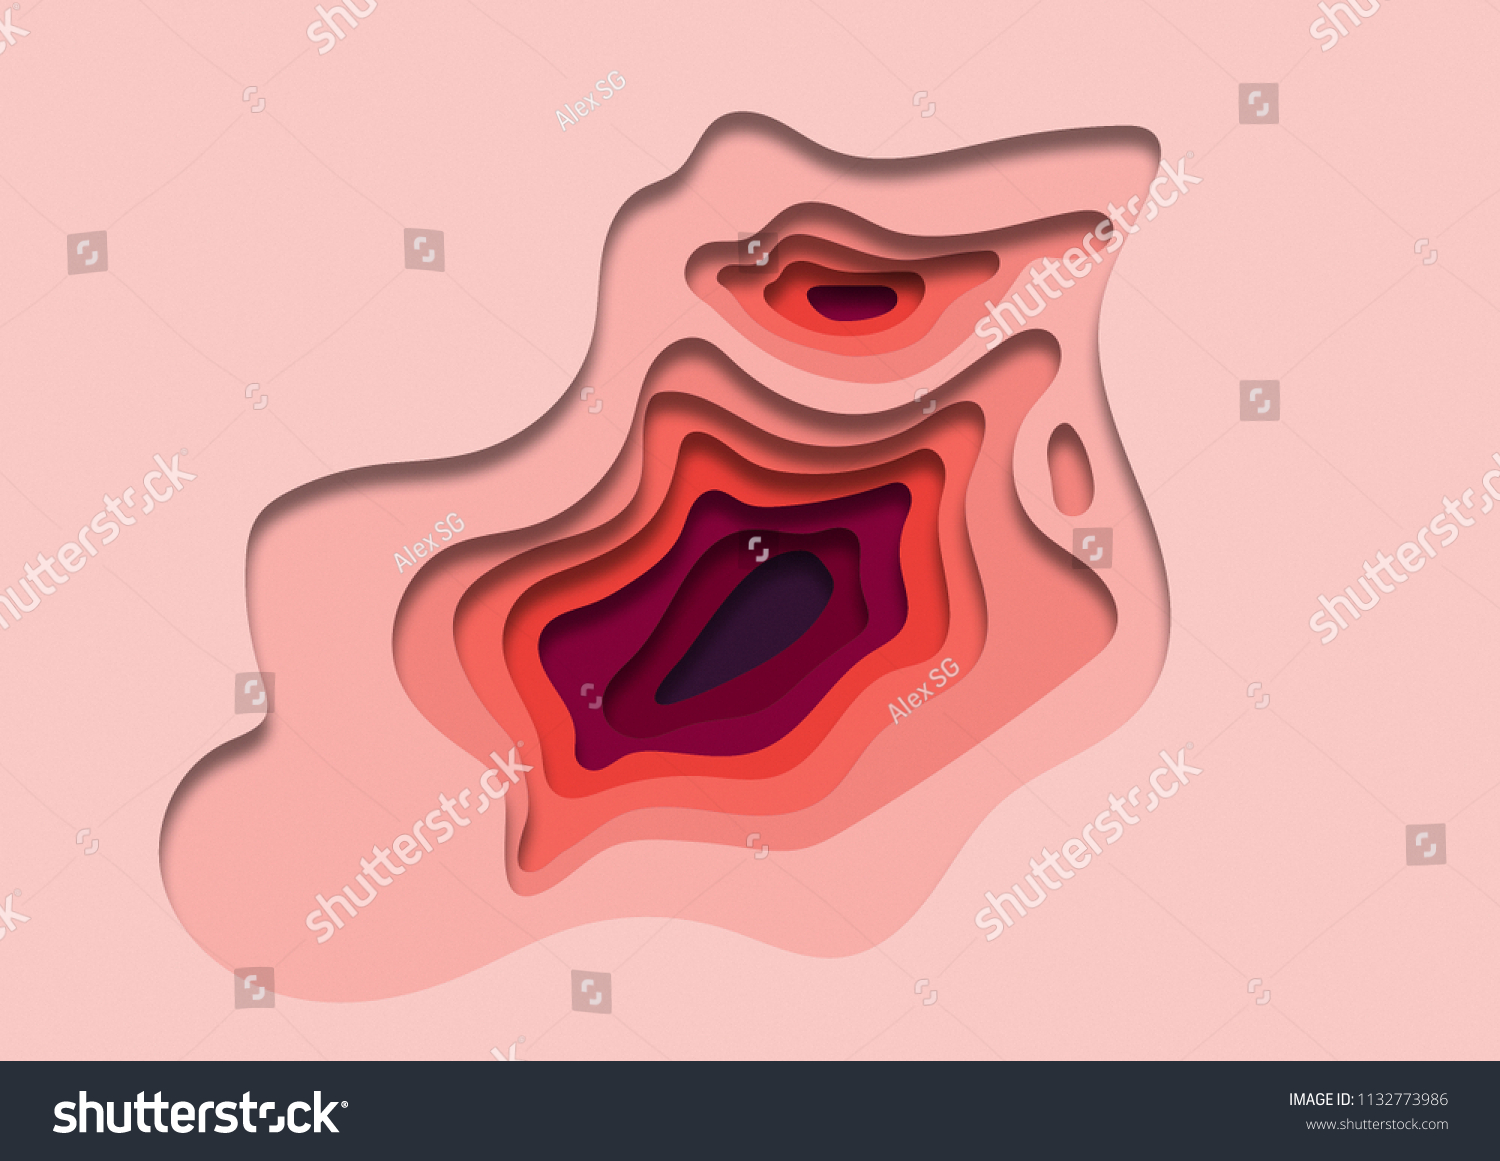 Abstract layered background cut out of colored paper in soft pink tones. Handmade. Concept design pattern for wallpaper, postcard, background. Flat lay, top view. #1132773986